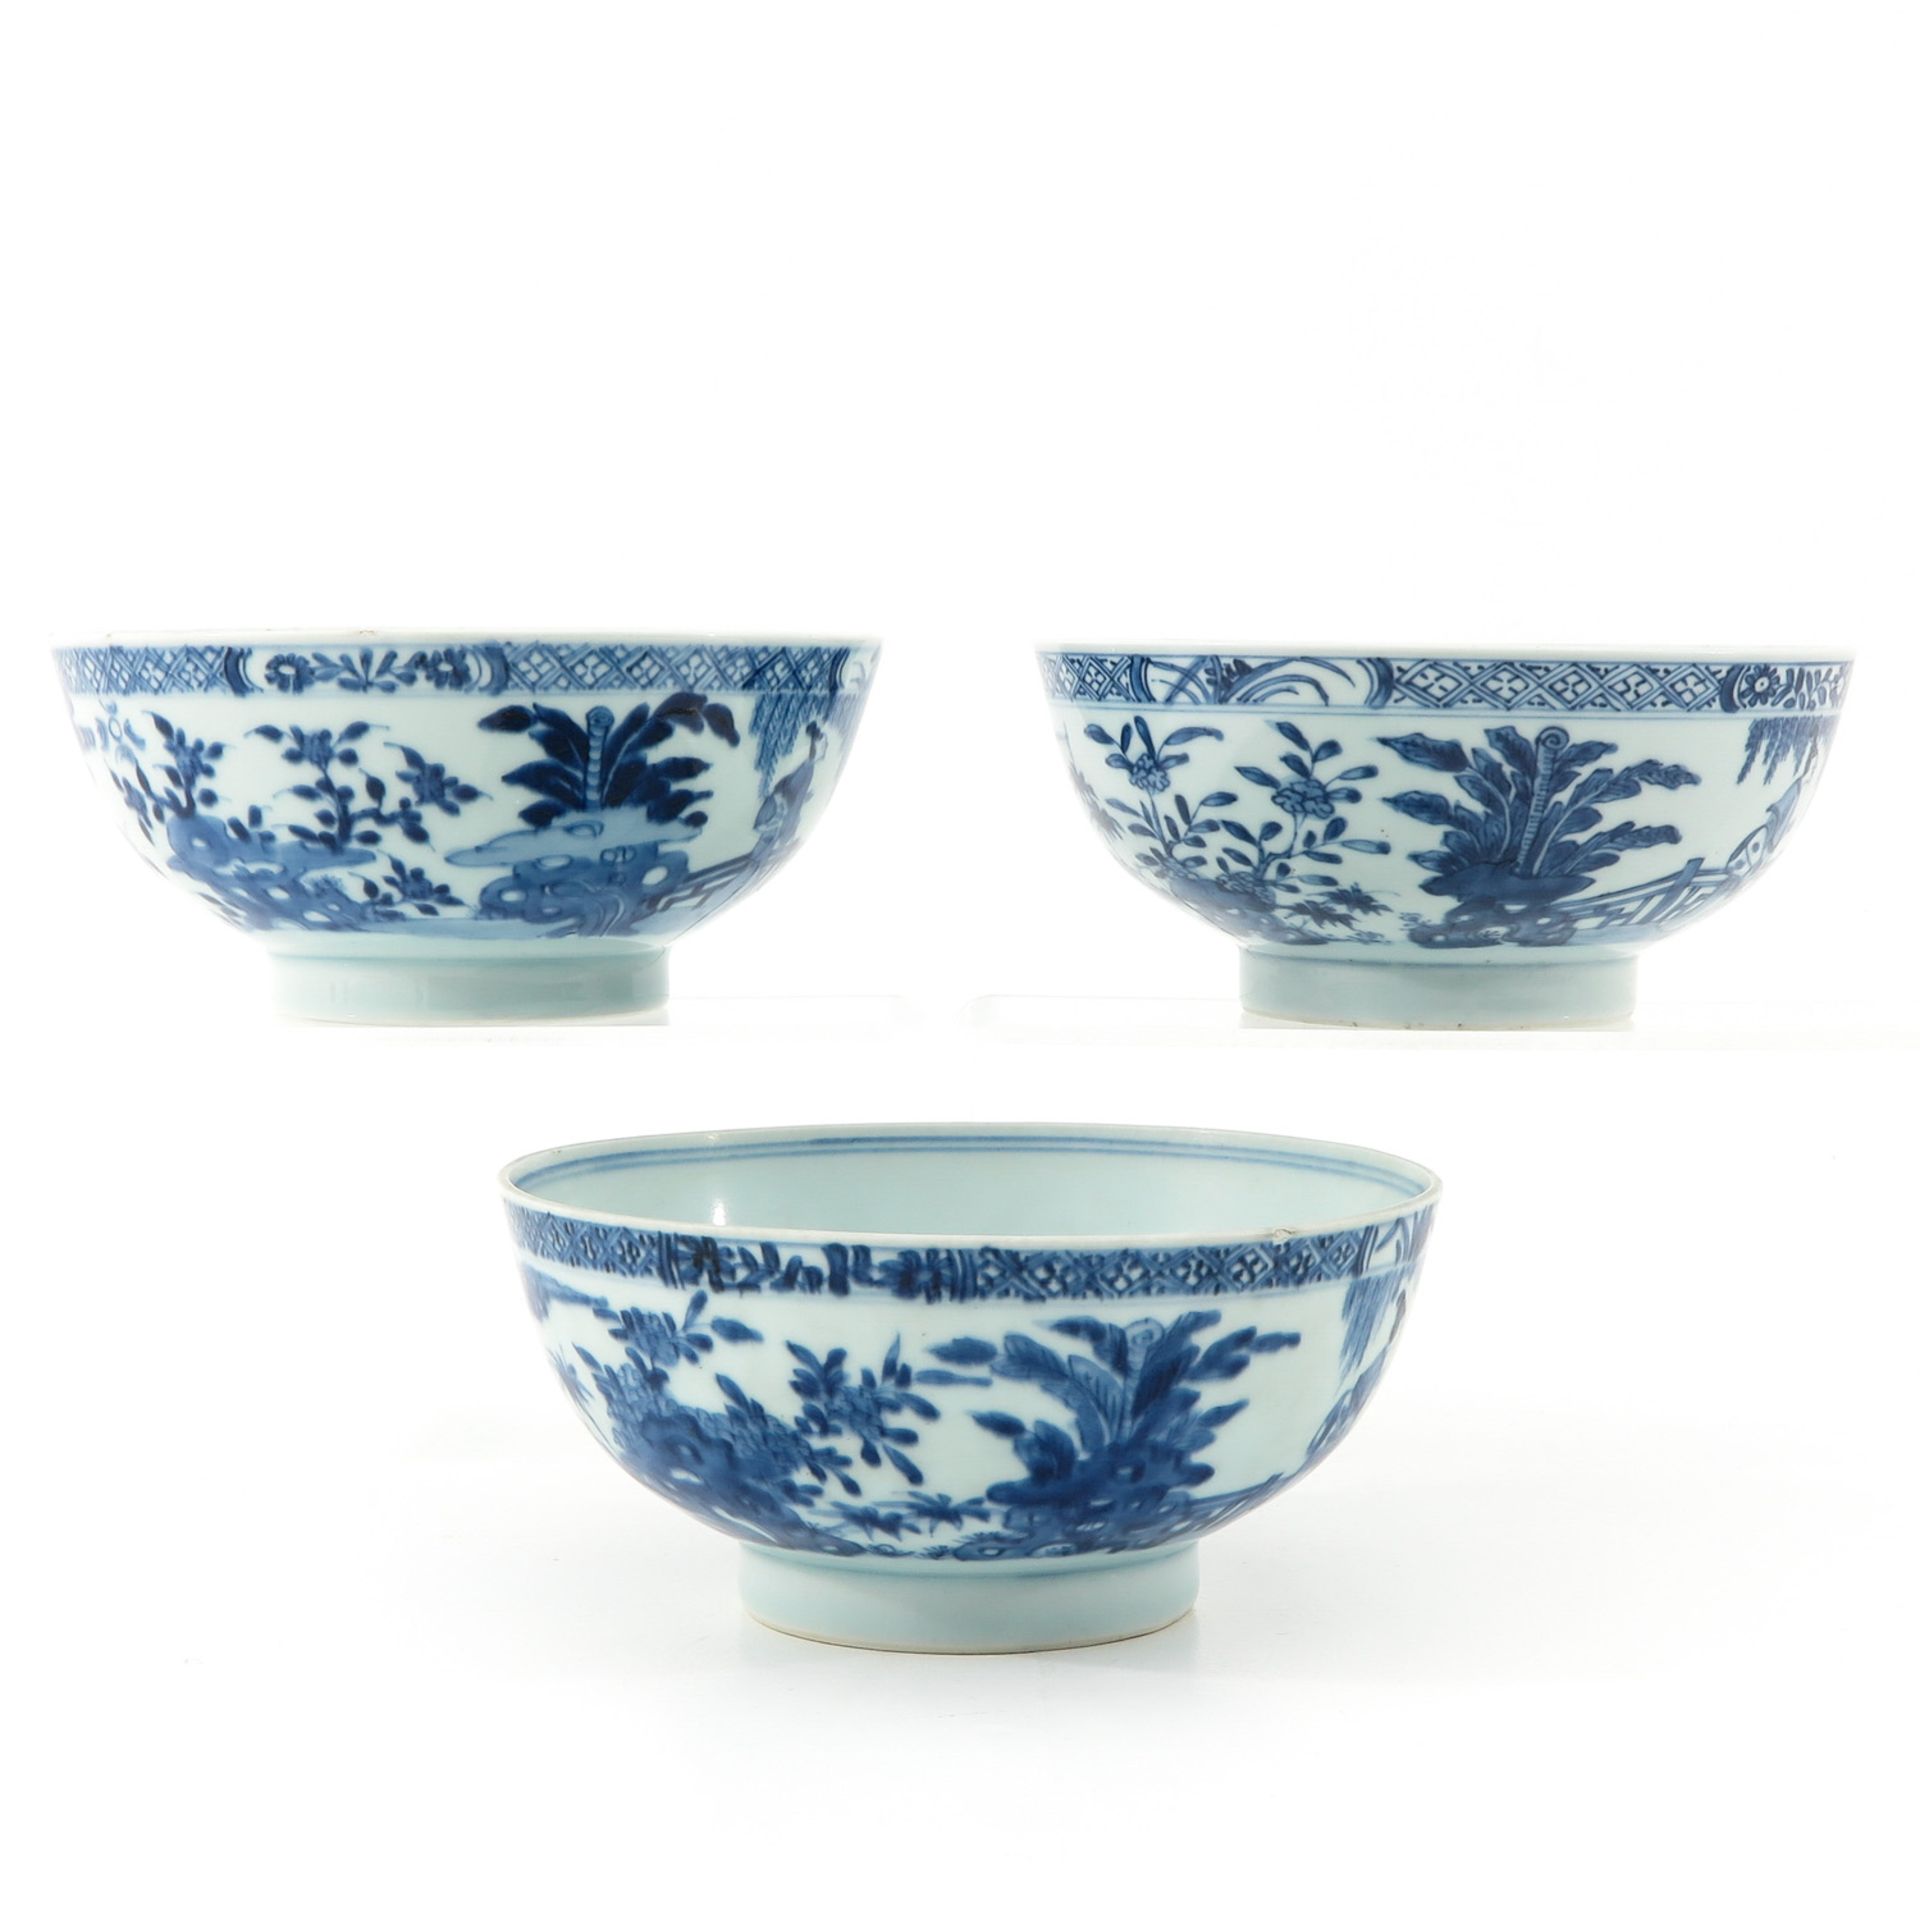 A Series of 3 Blue and White Bowls - Image 4 of 10